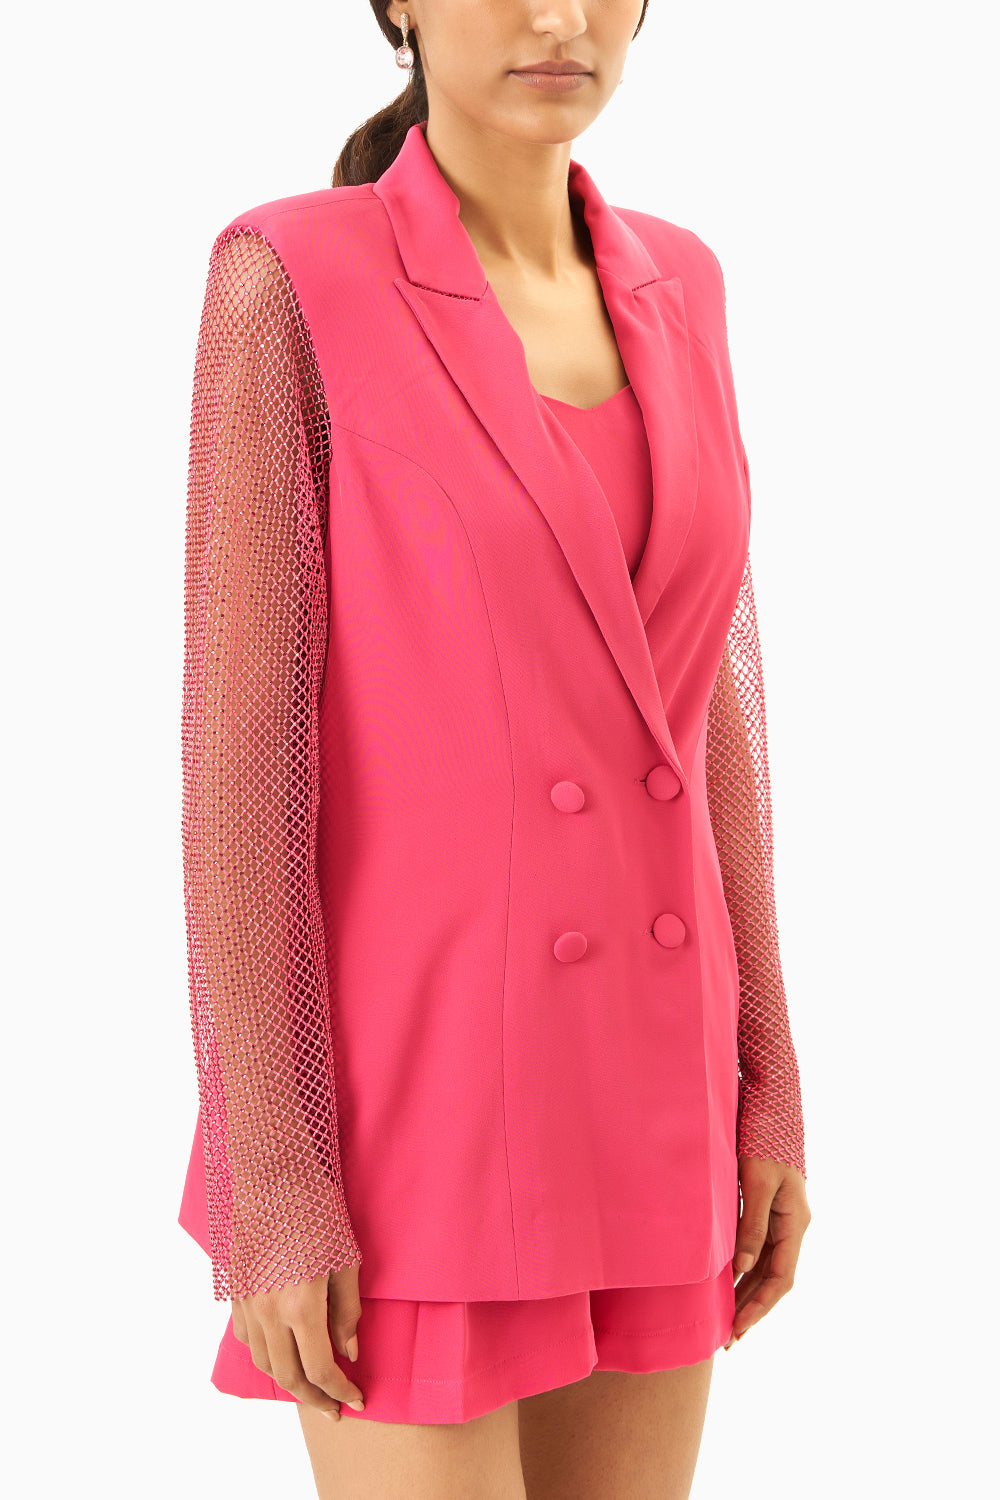 Pink Mesh Blazer with Crystals Co-ord Set